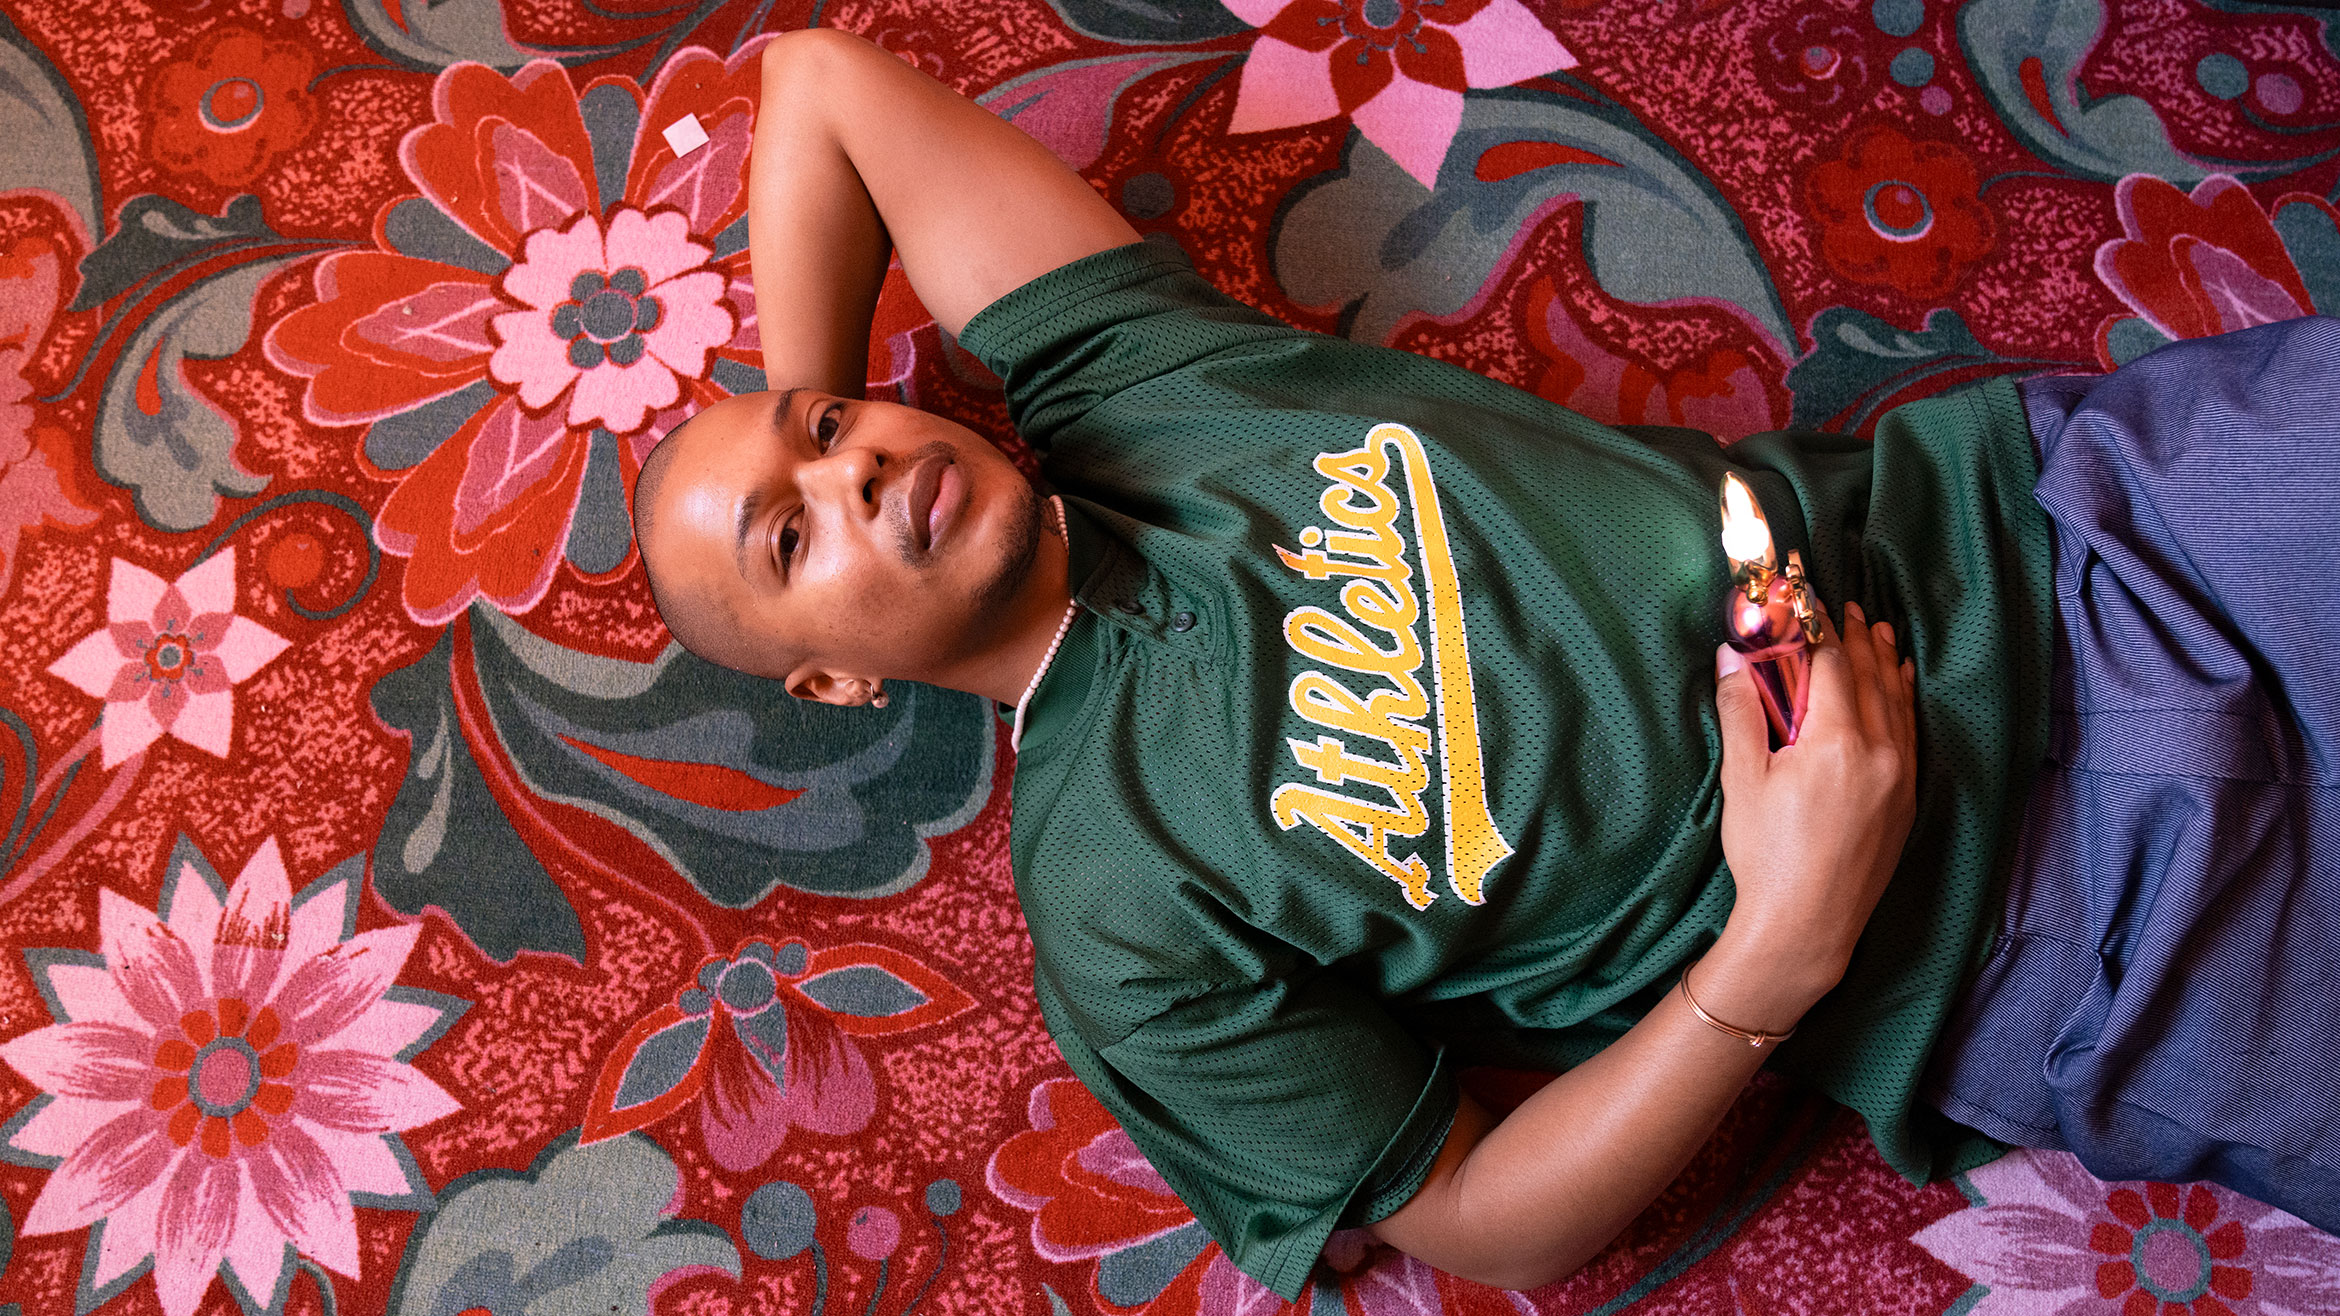 A person wearing an Athletics jersey lies on their back on a floral carpet.